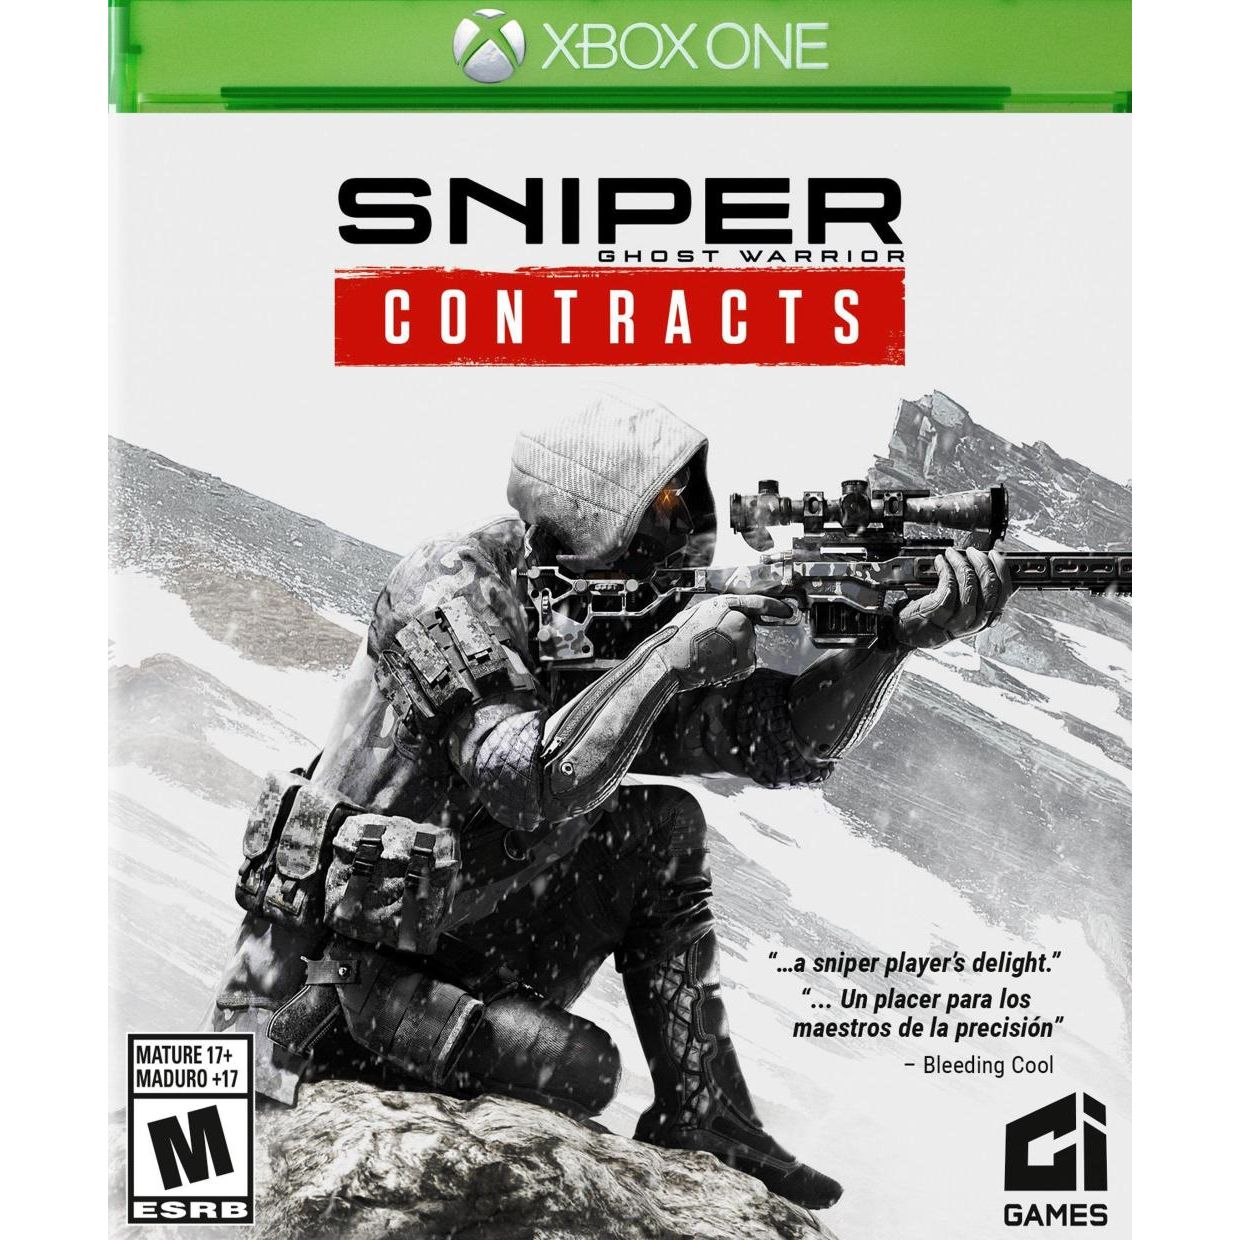 XBOX ONE - Sniper Ghost Warrior Contracts